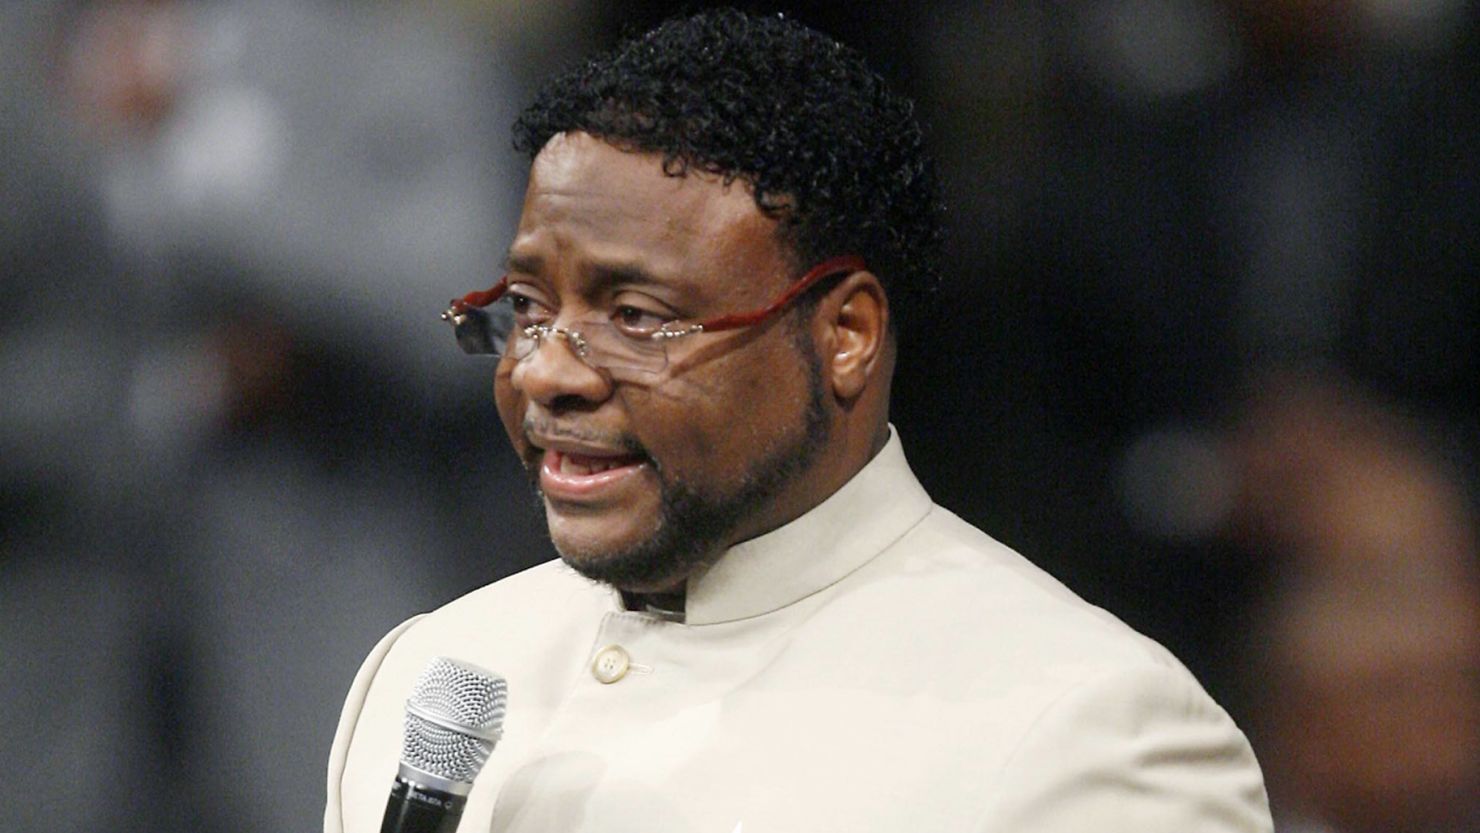 Bishop Eddie Long has apologized for a ritual in which he was wrapped in a Jewish scriptural scroll.